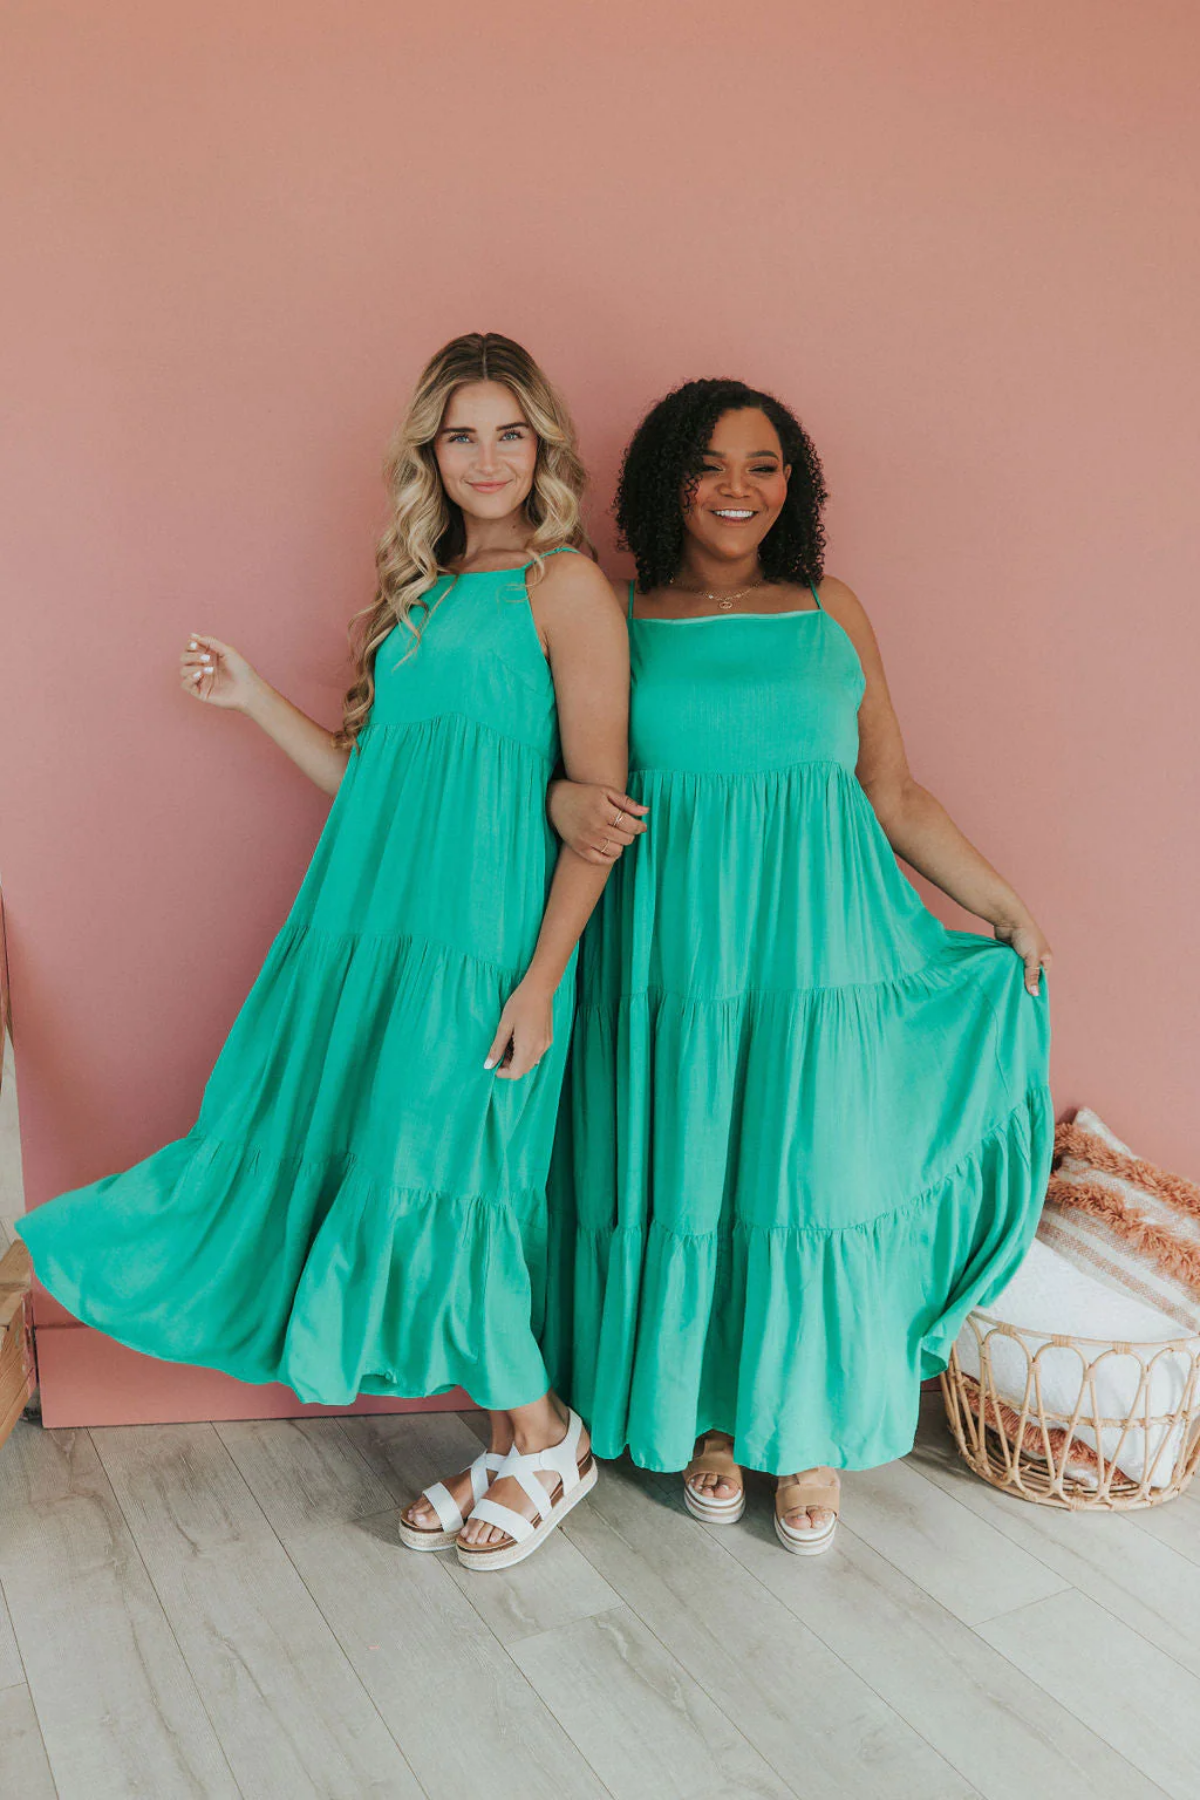 1677521351 427 The 2023 maxi dresses that accentuate your upper body.webp - The 2023 maxi dresses that accentuate your upper body!